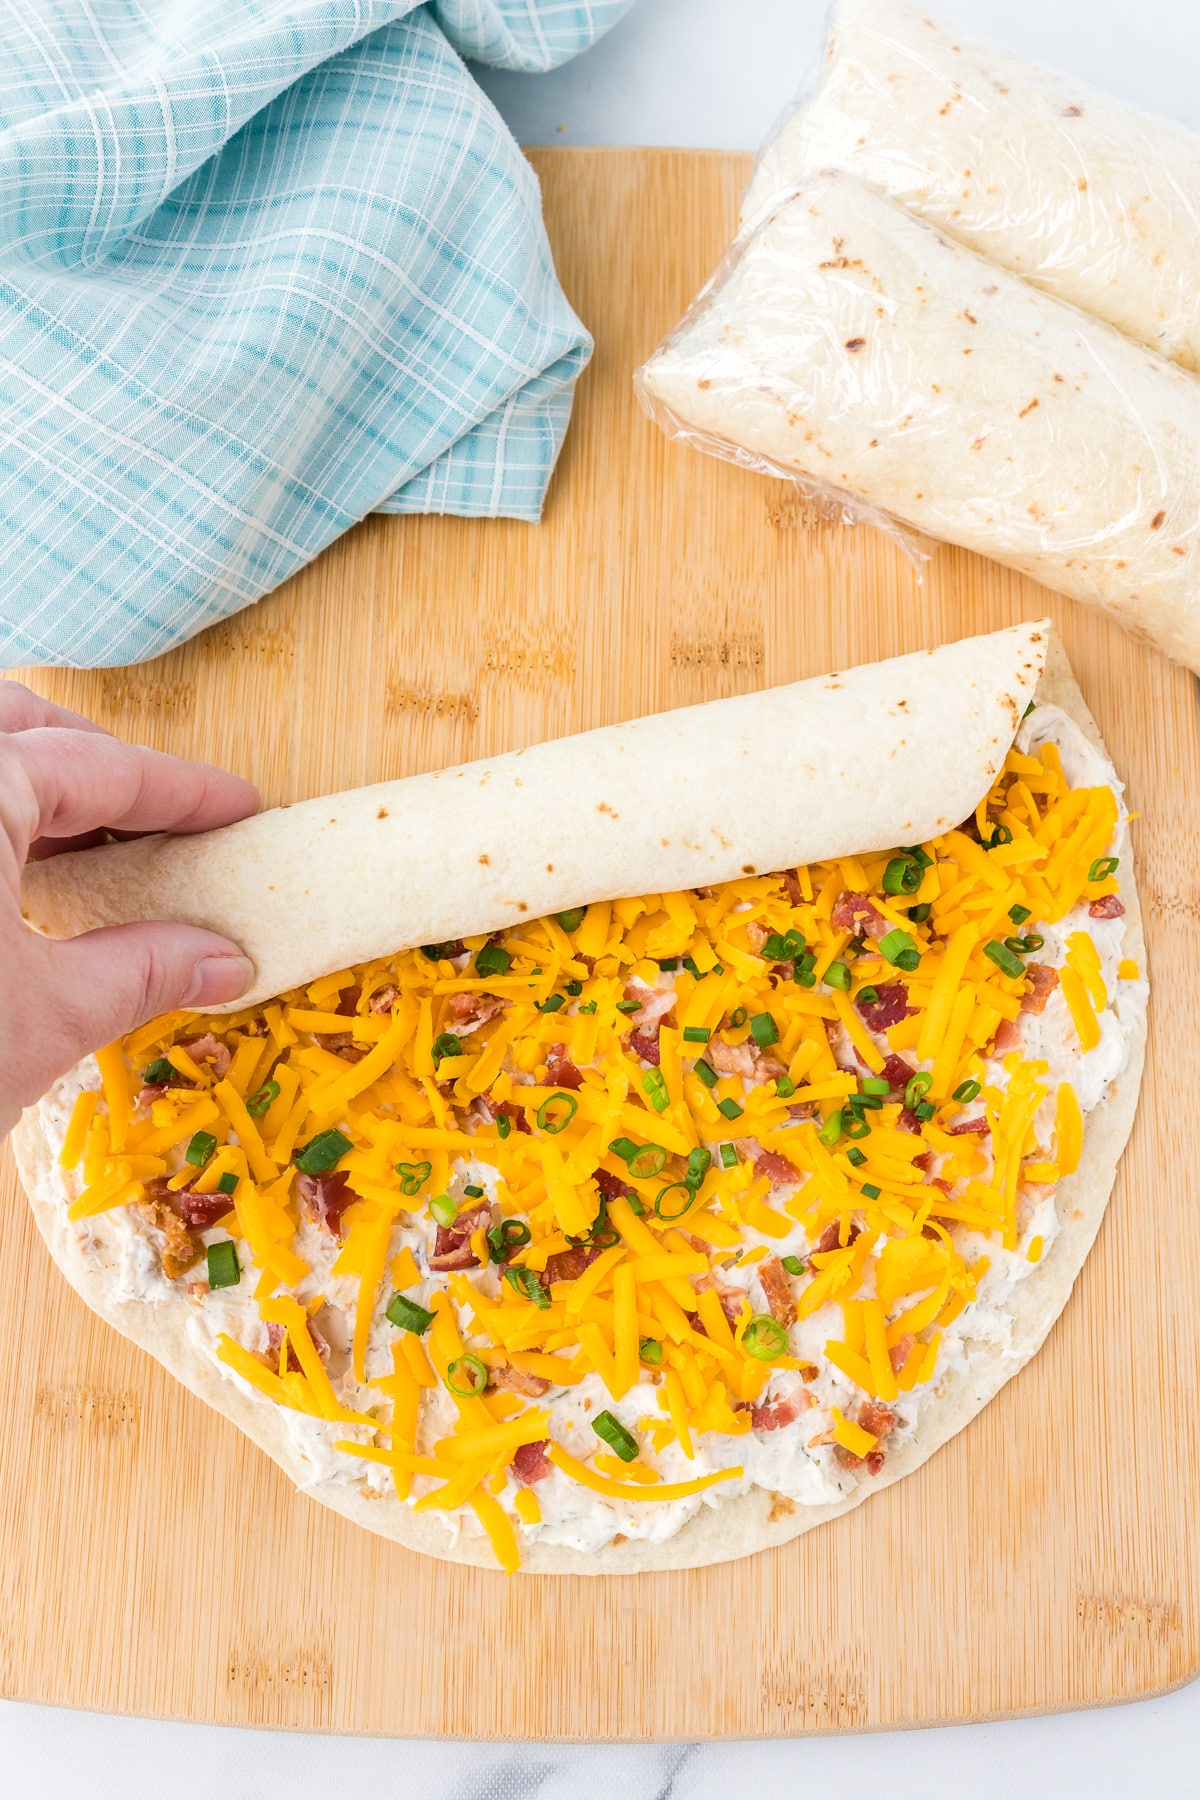 Tortilla loaded with cheddar cheese, bacon, green onions and a cream cheese mixture being rolled tightly.